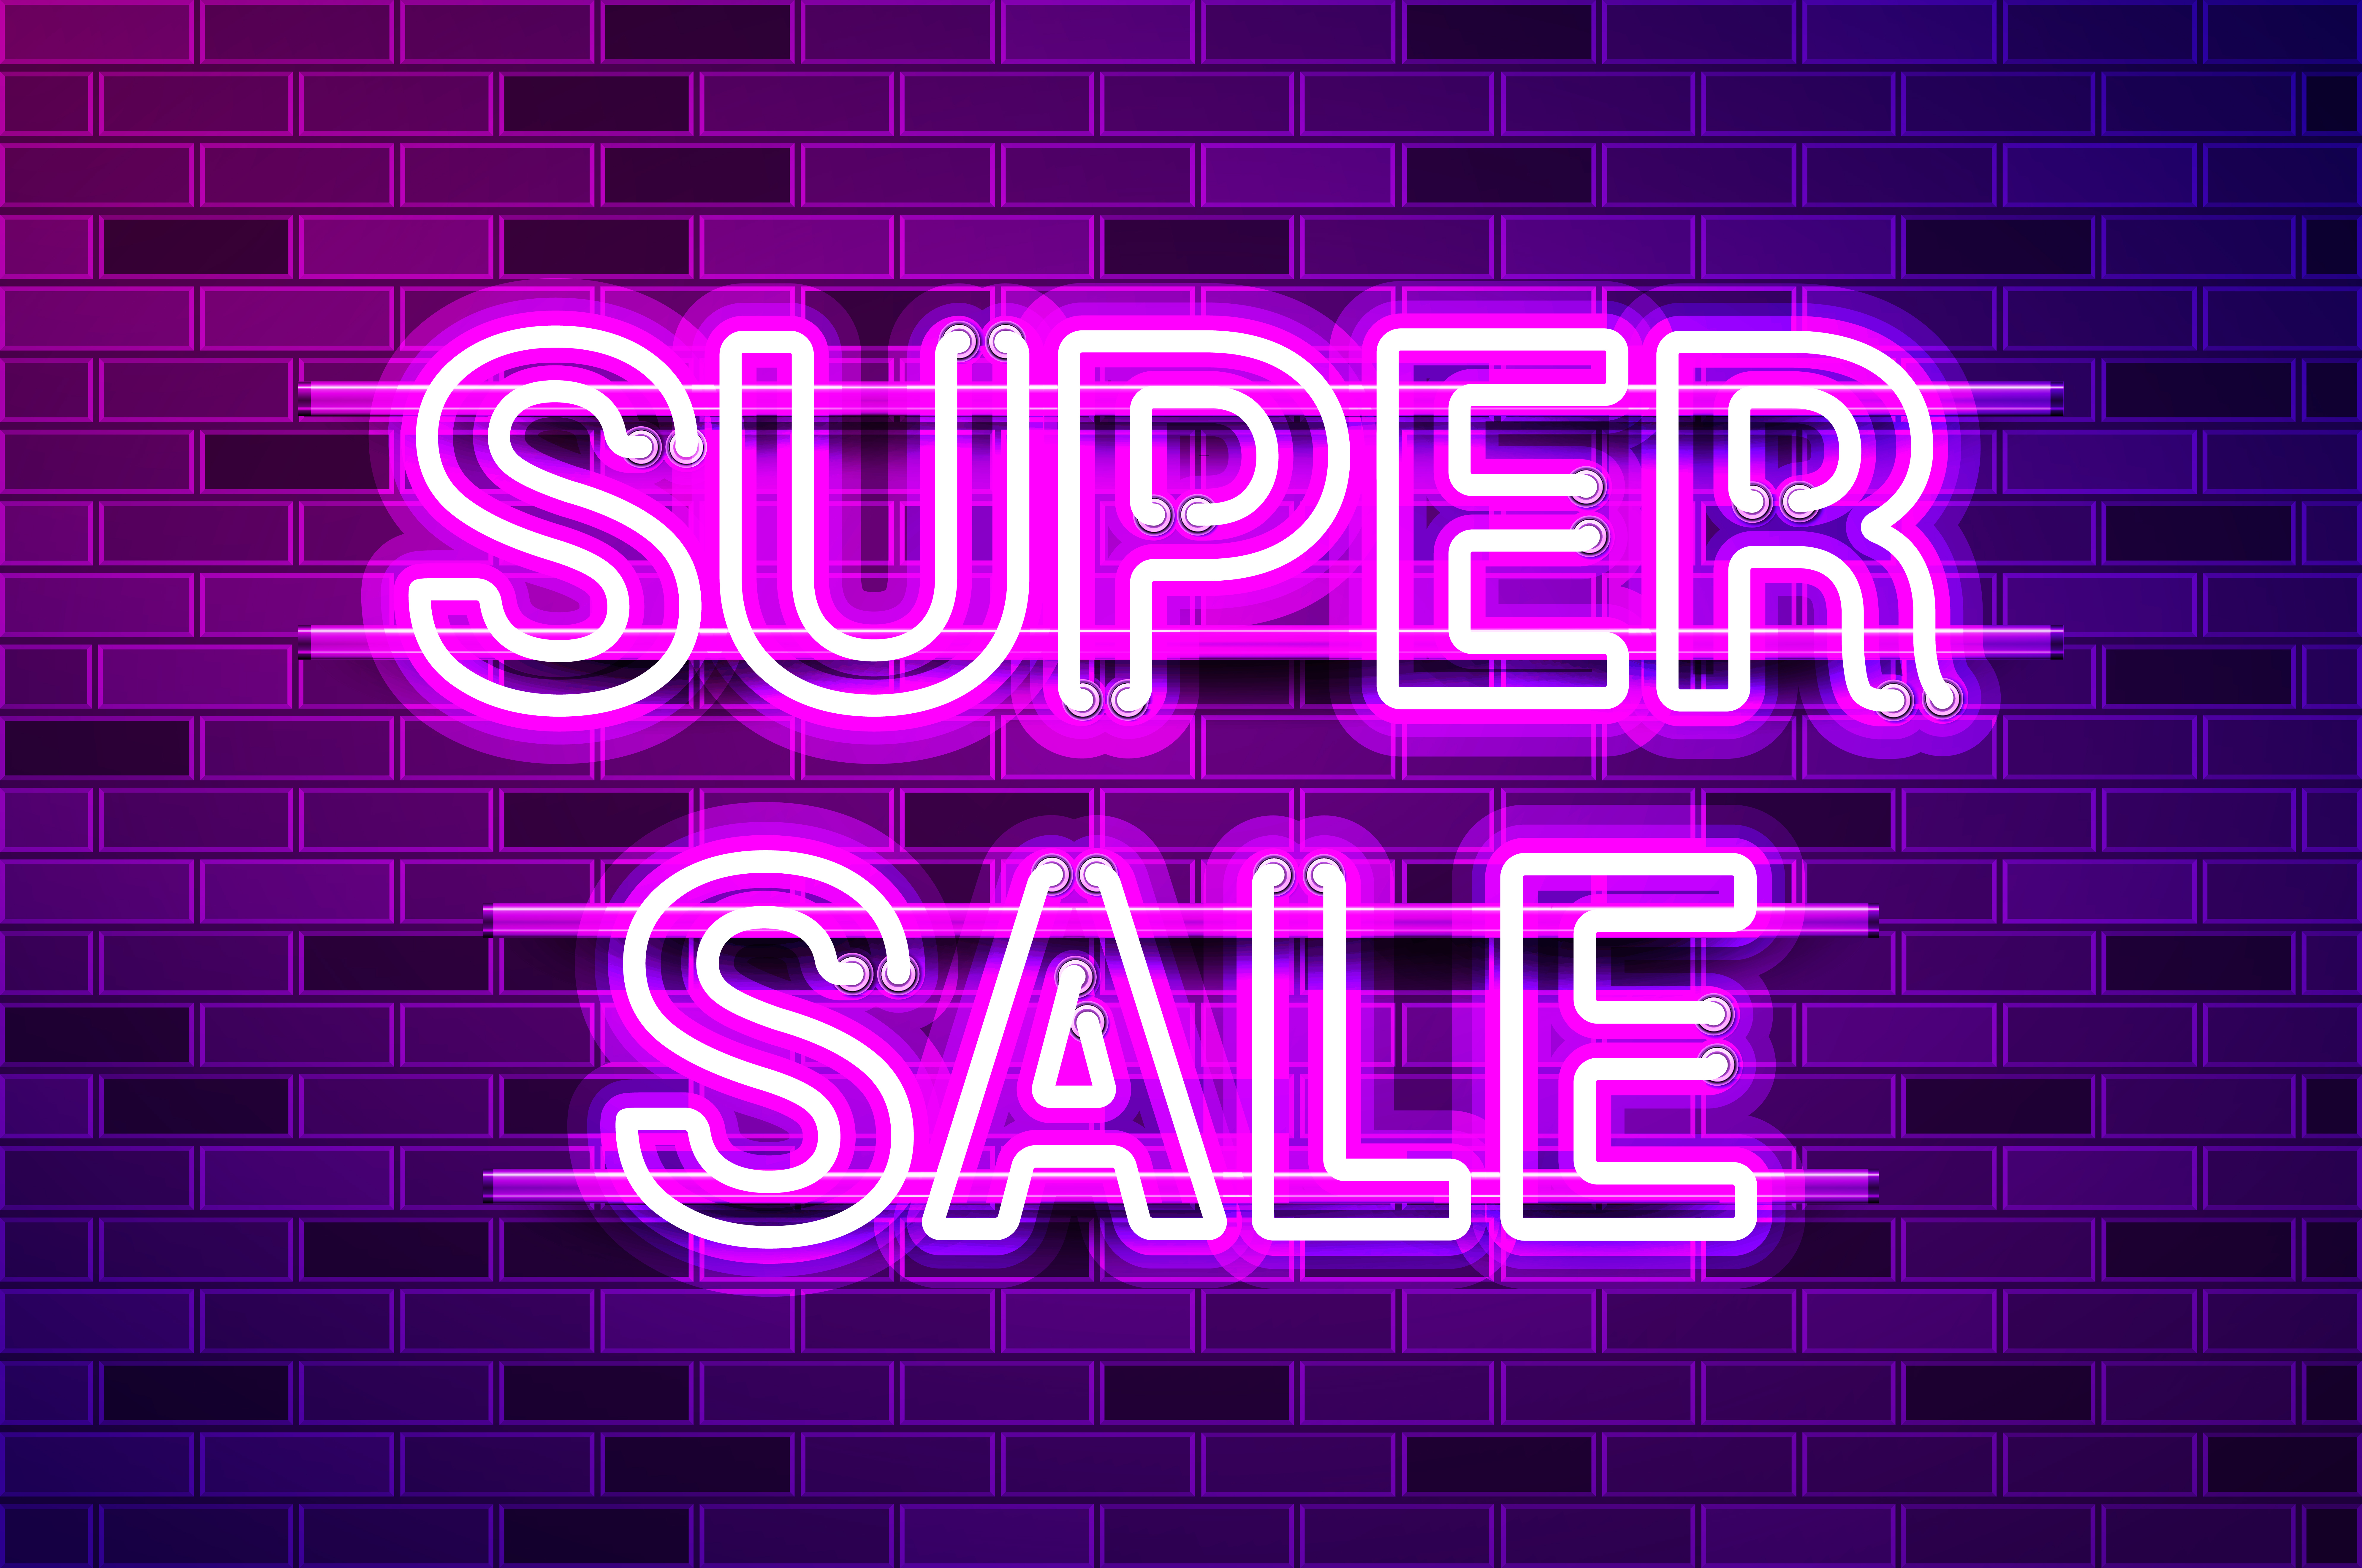 SUPER SALE glowing neon lamp sign. Realistic vector illustration. Purple brick wall, violet glow, metal holders.. SUPER SALE glowing purple neon lamp sign